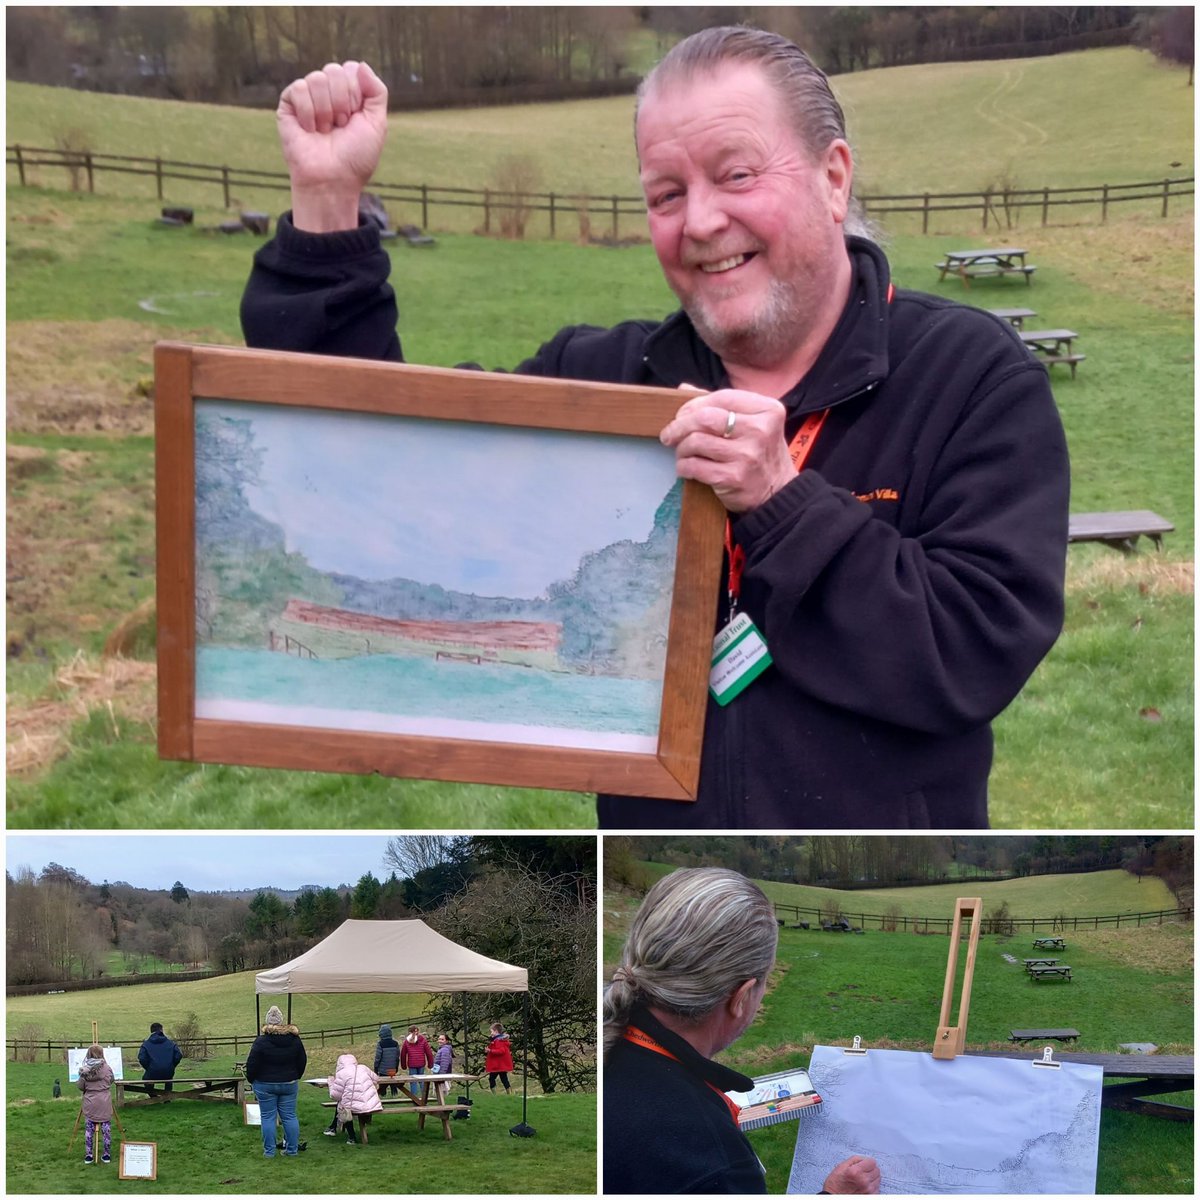 One of the reasons the original owners decided to build a grand villa here was the incredible view. At one of the stops on the #halfterm trail, families will be able to paint this view. #halftermactivities 

David from the Welcome Team had some fun helping us with testing.